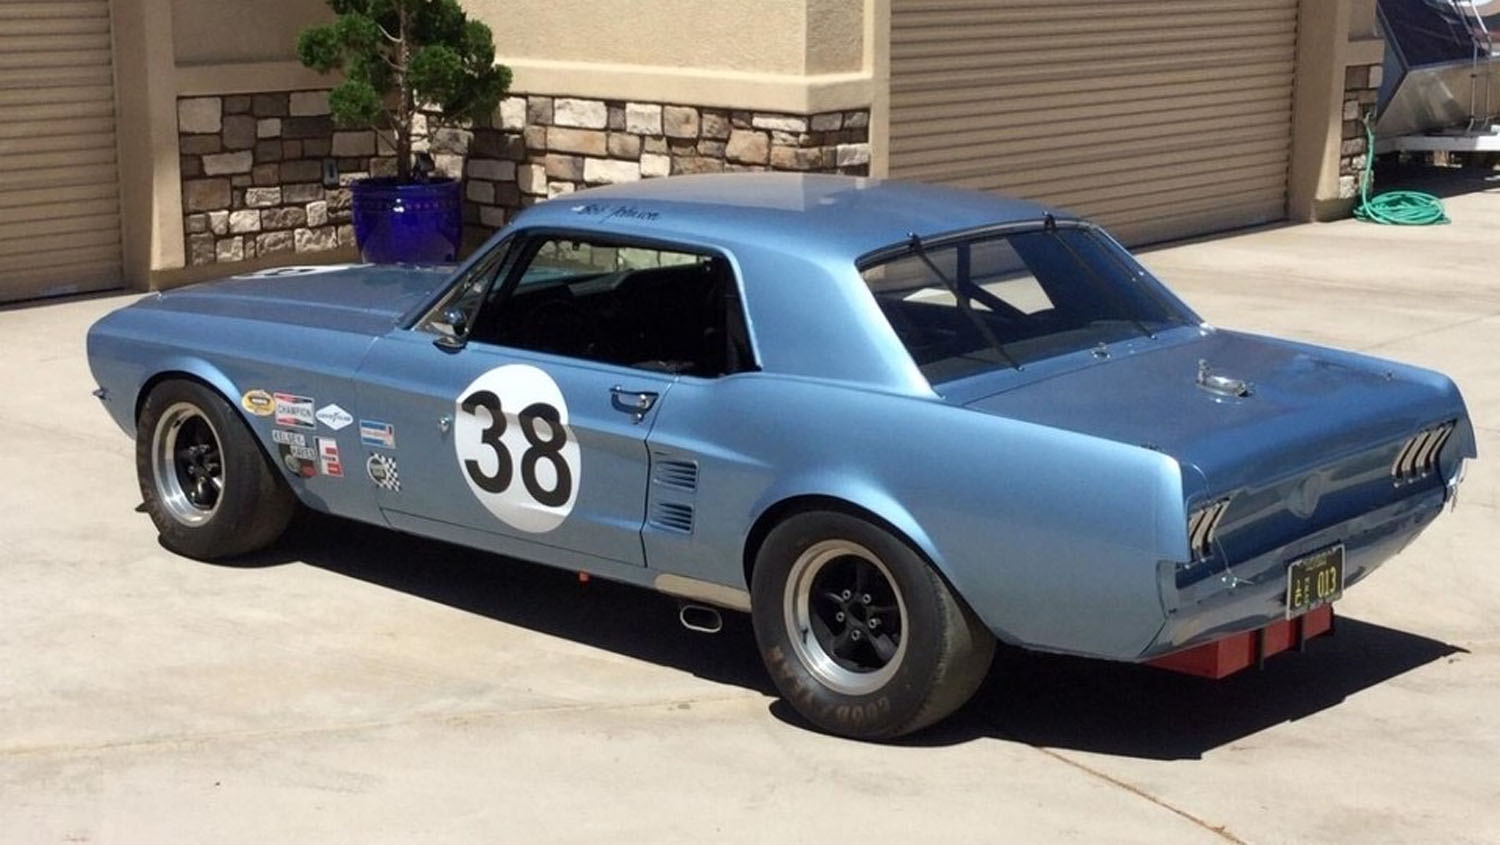 1967 Ford Mustang Race Car Heads To Auction